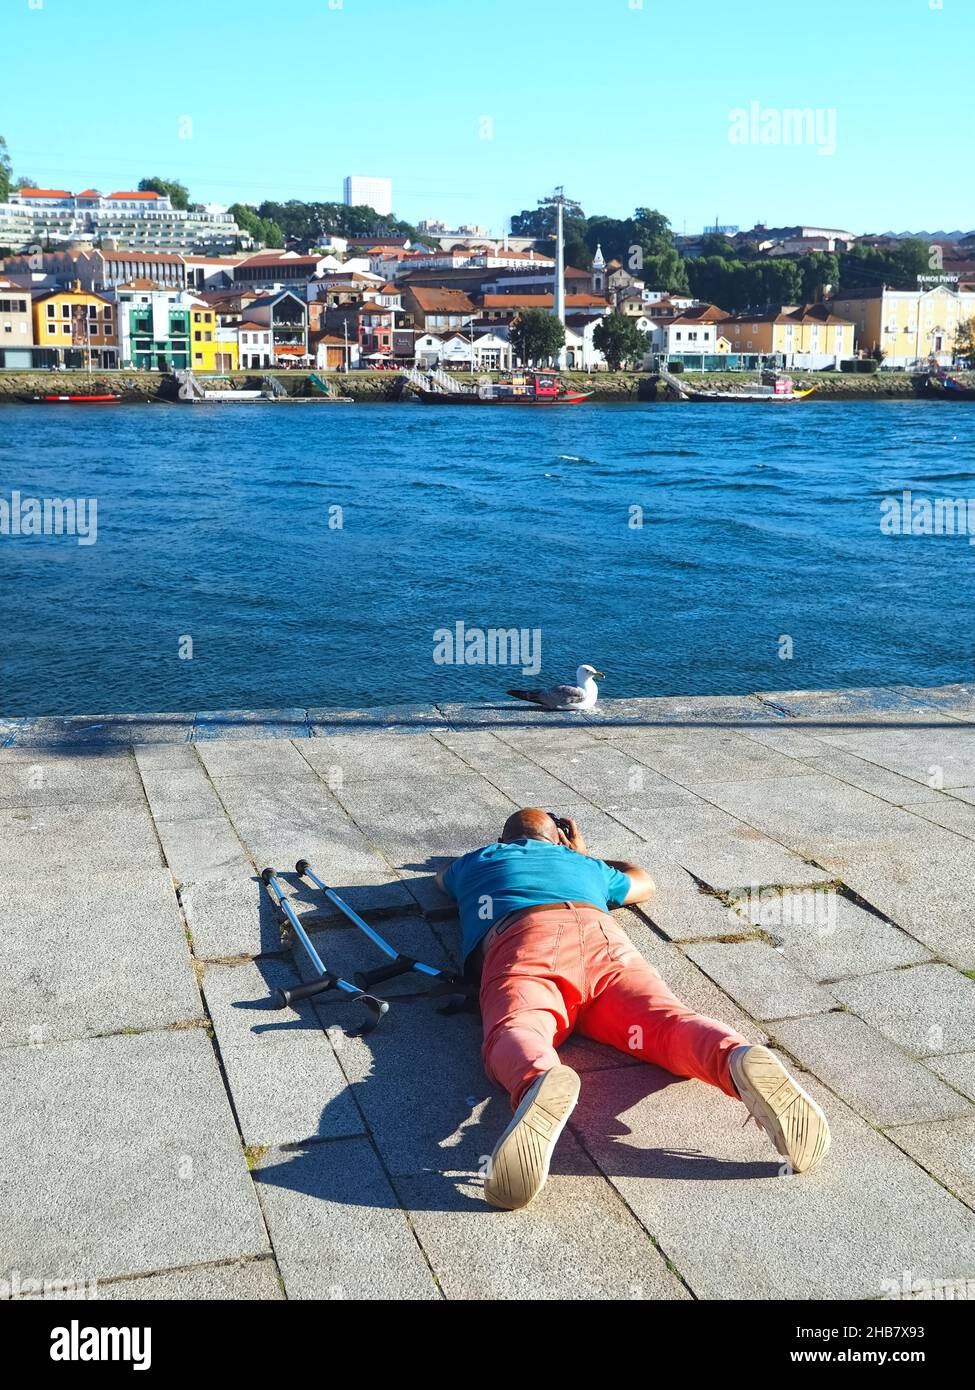 Photographer with a disability an crutches photographs a seagull in Porto Stock Photo